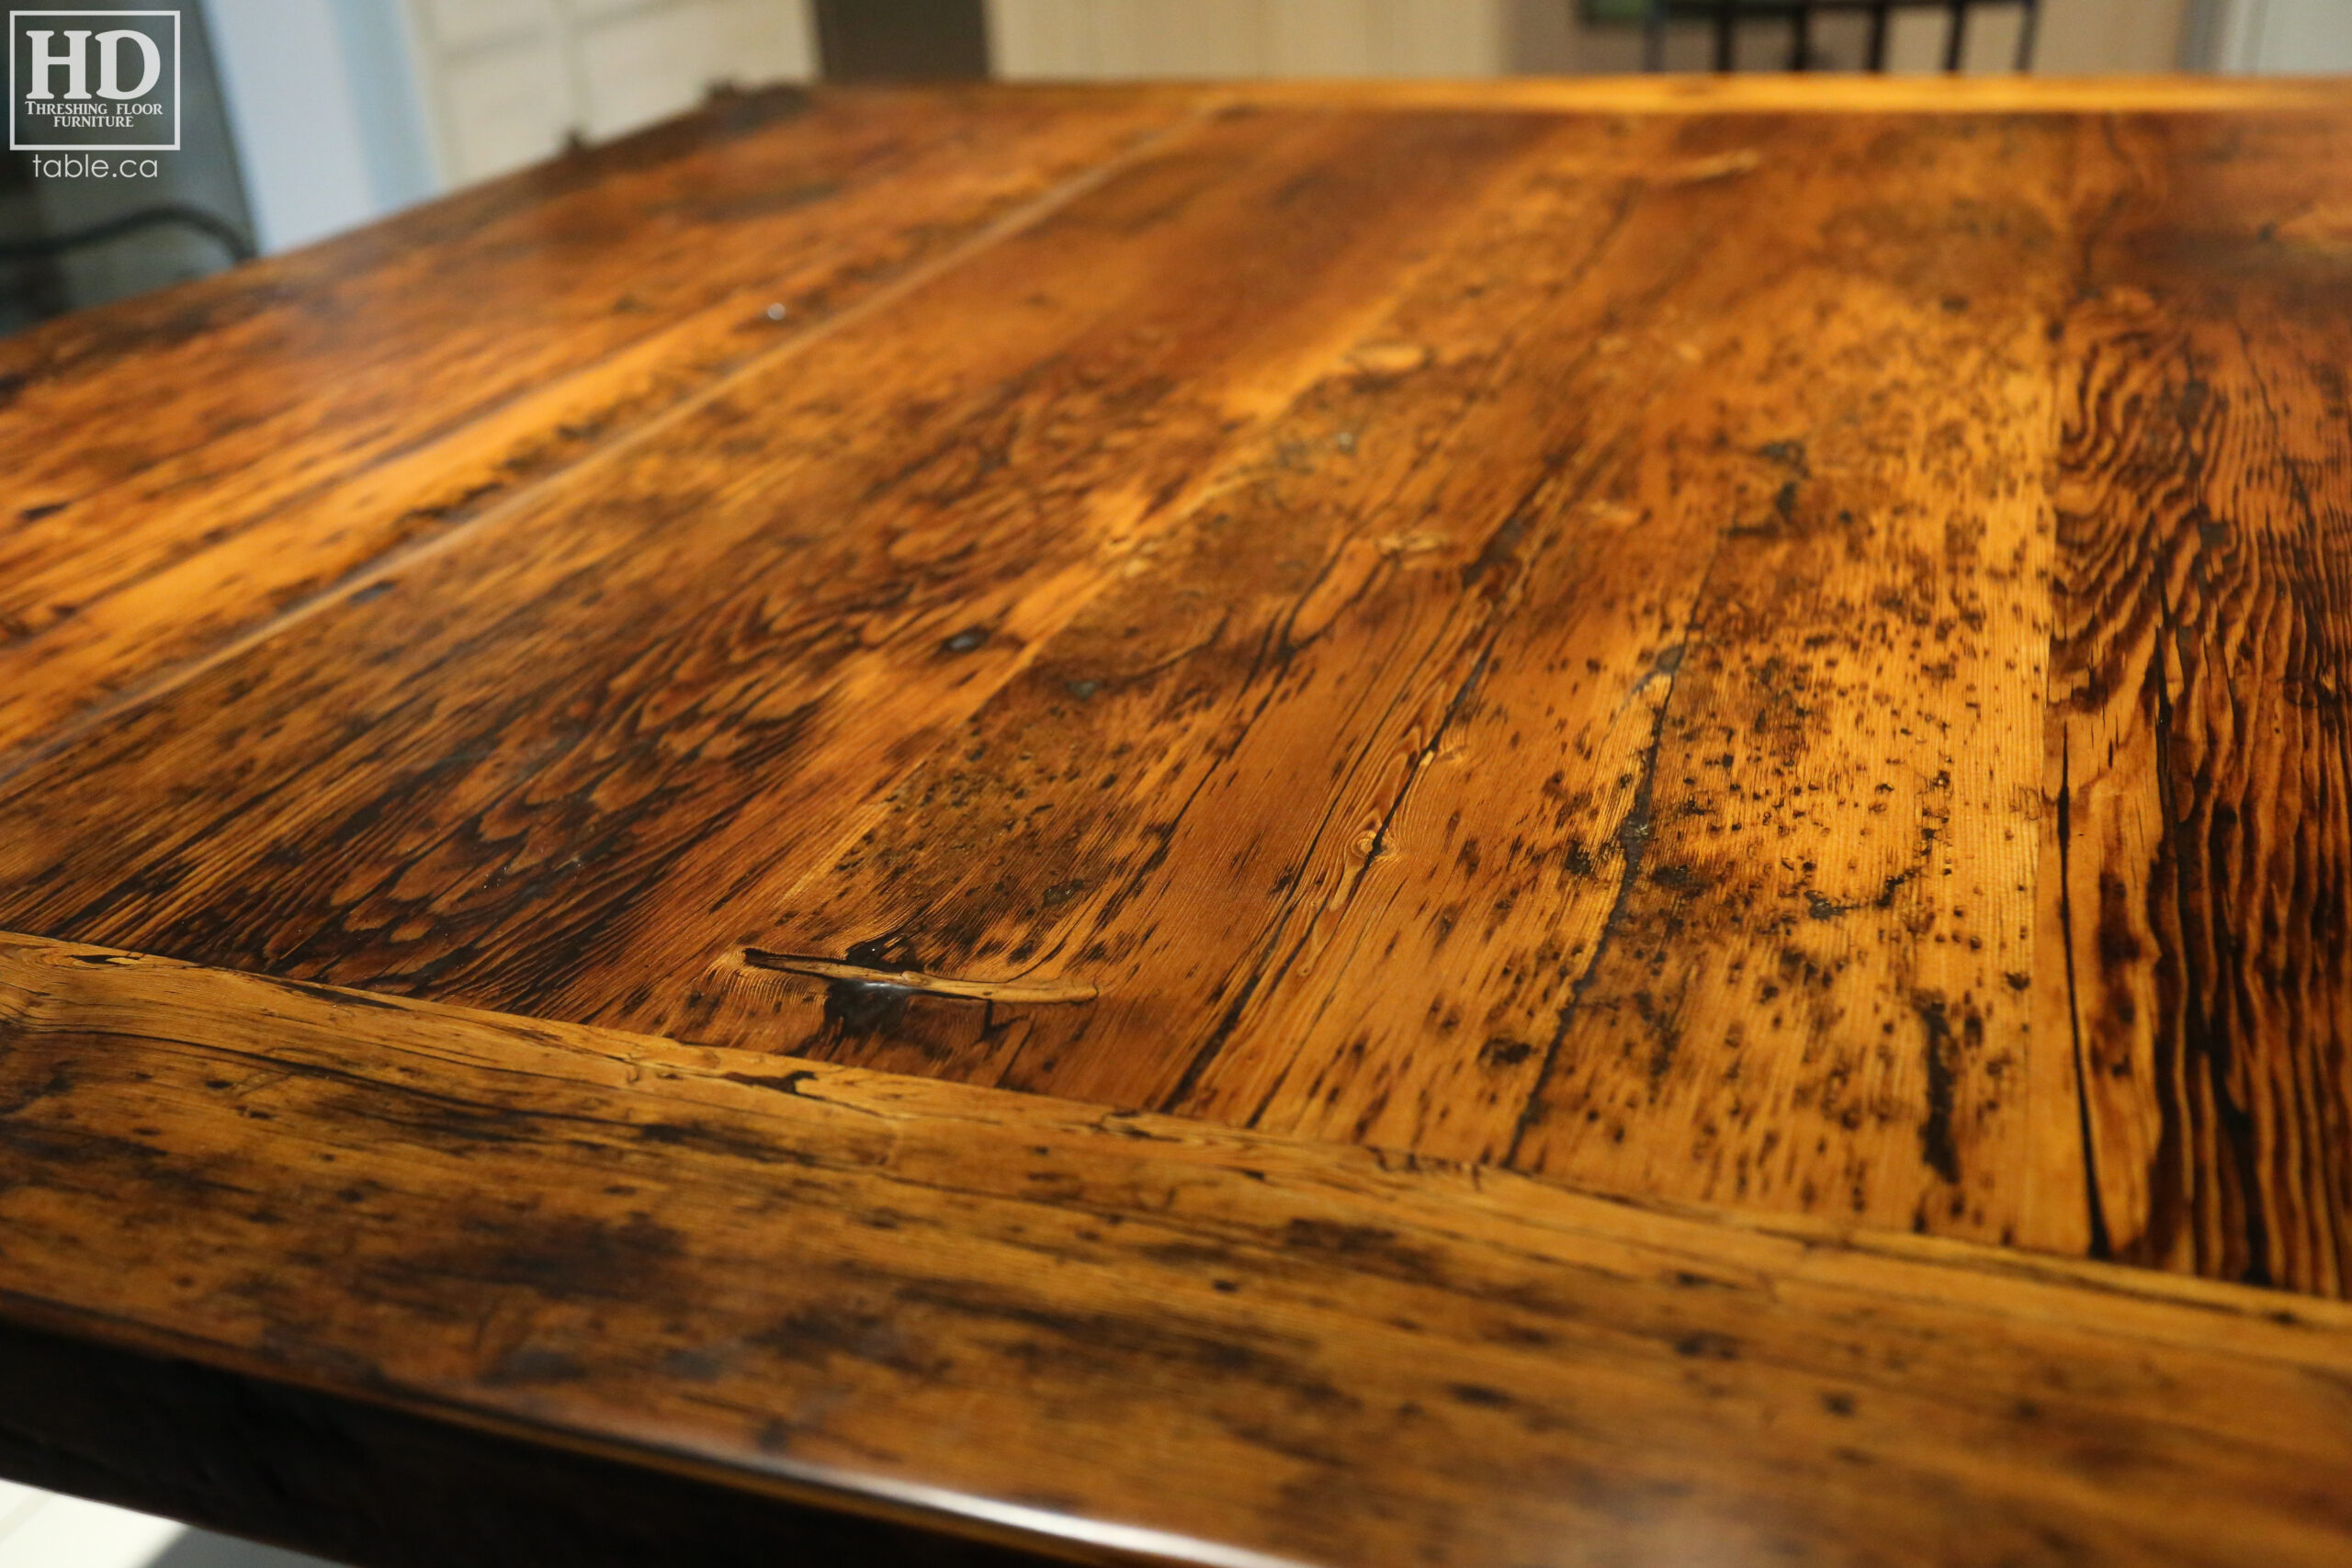 Reclaimed Wood Pedestal Kitchen Table by HD Threshing Floor Furniture / www.table.ca